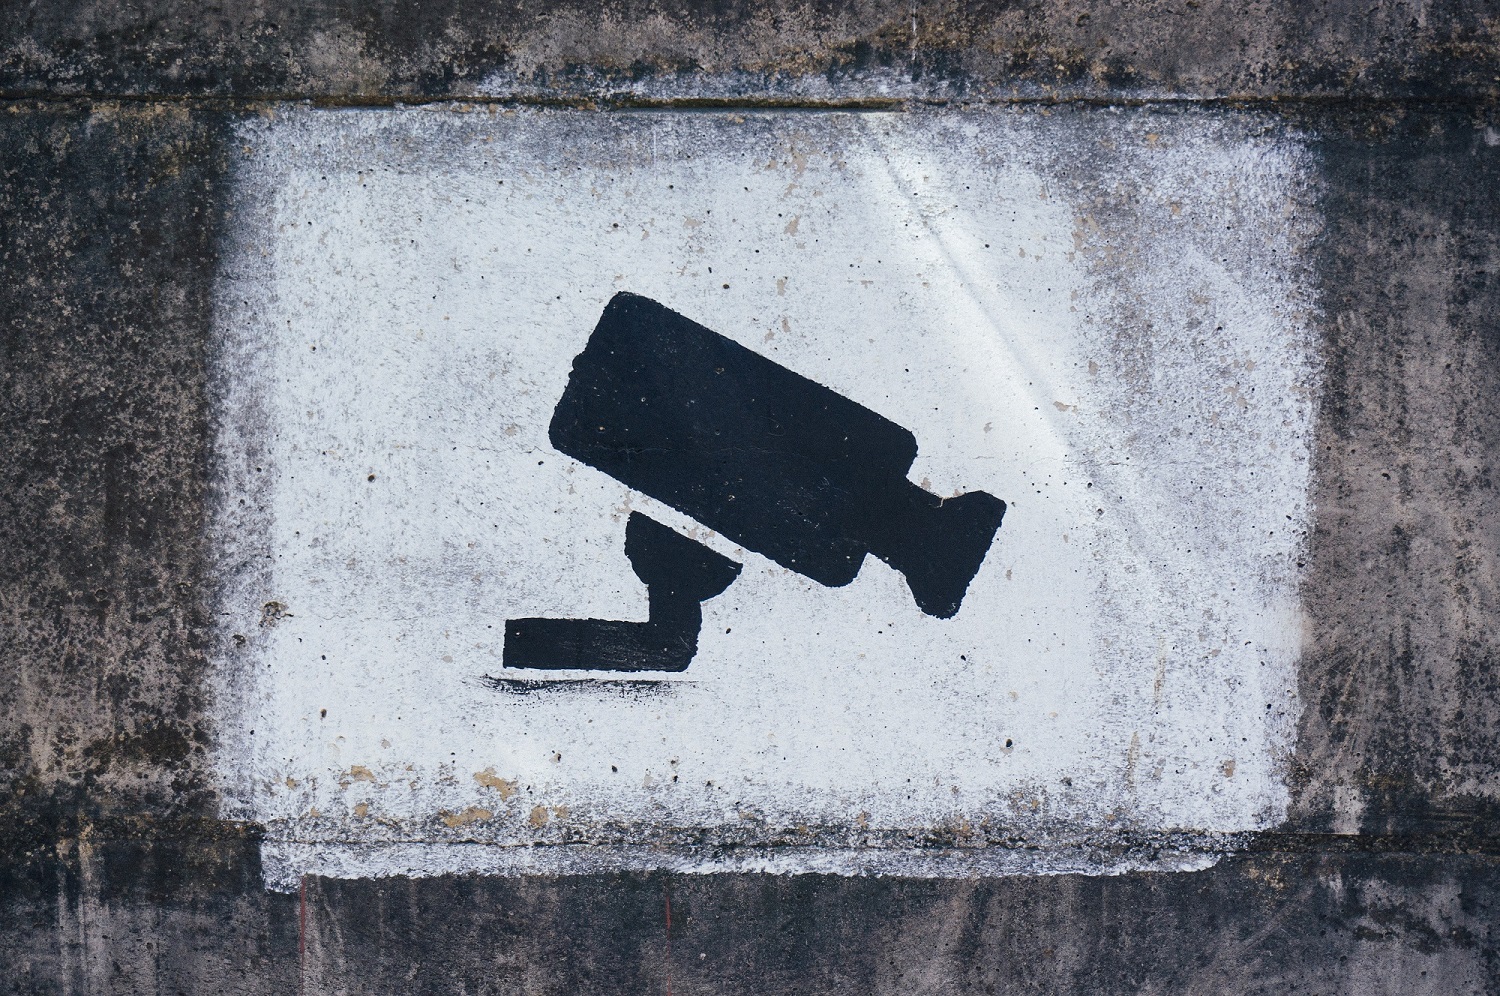 Germany: Detailed guidance concerning data processing by CCTV